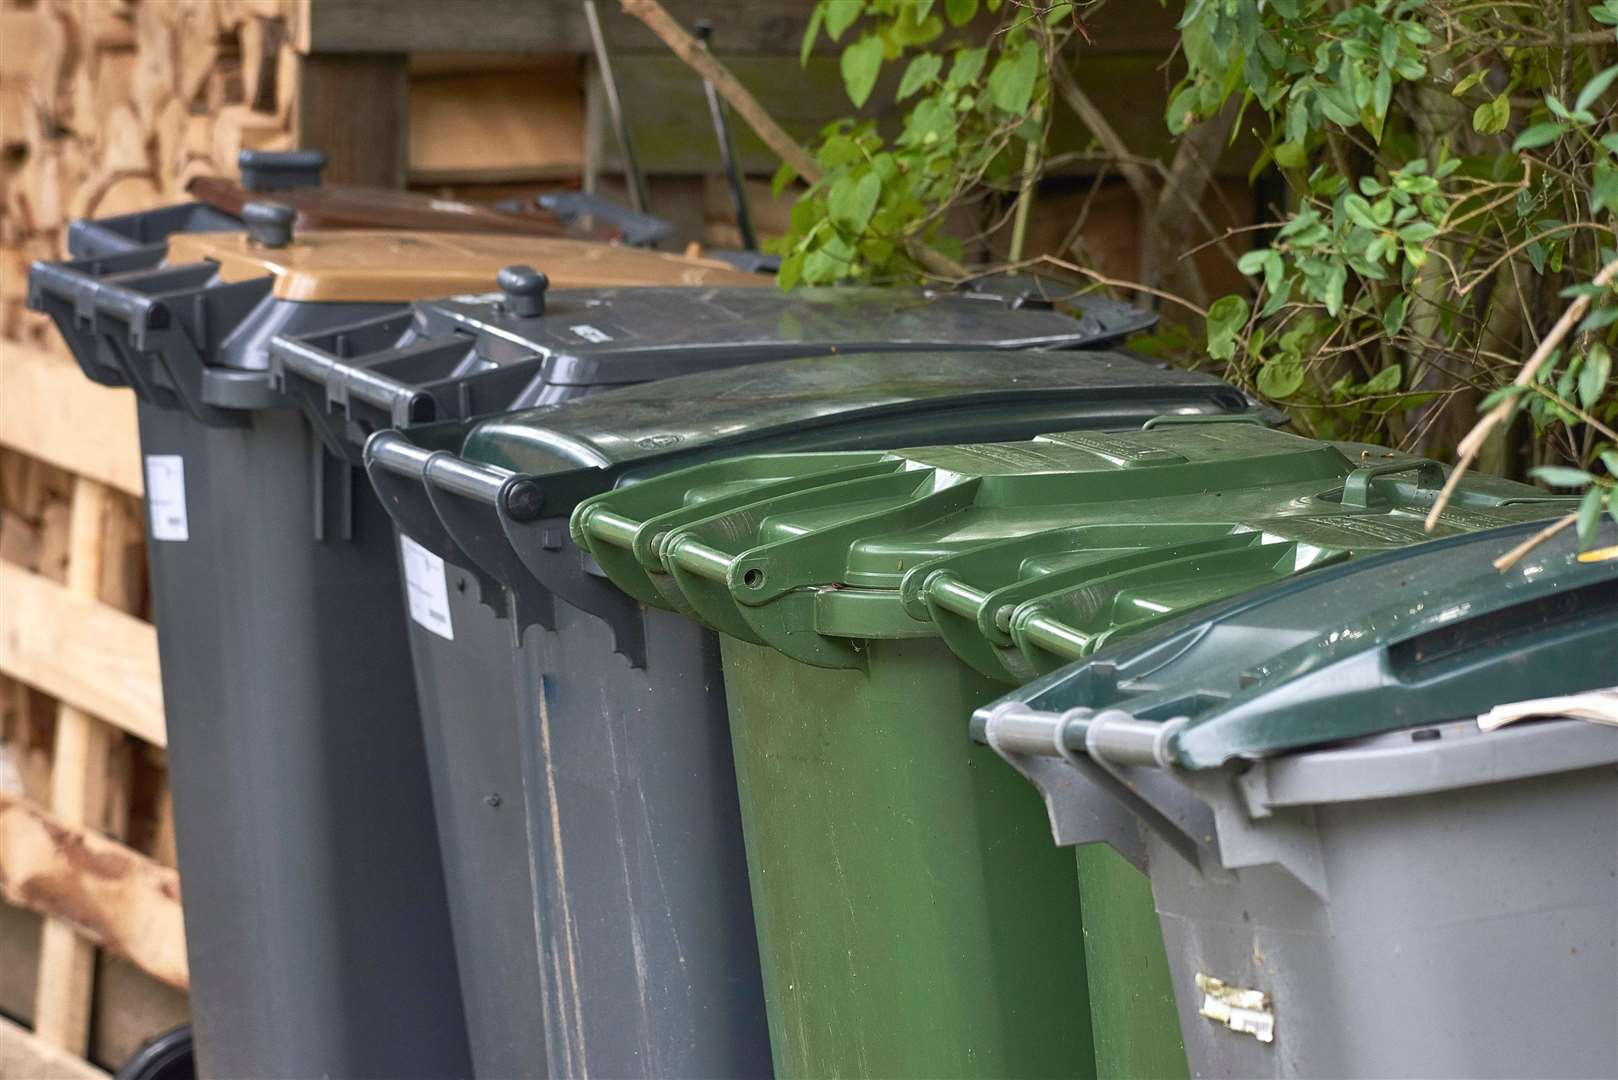 Stock image of bins. Picture: iStock